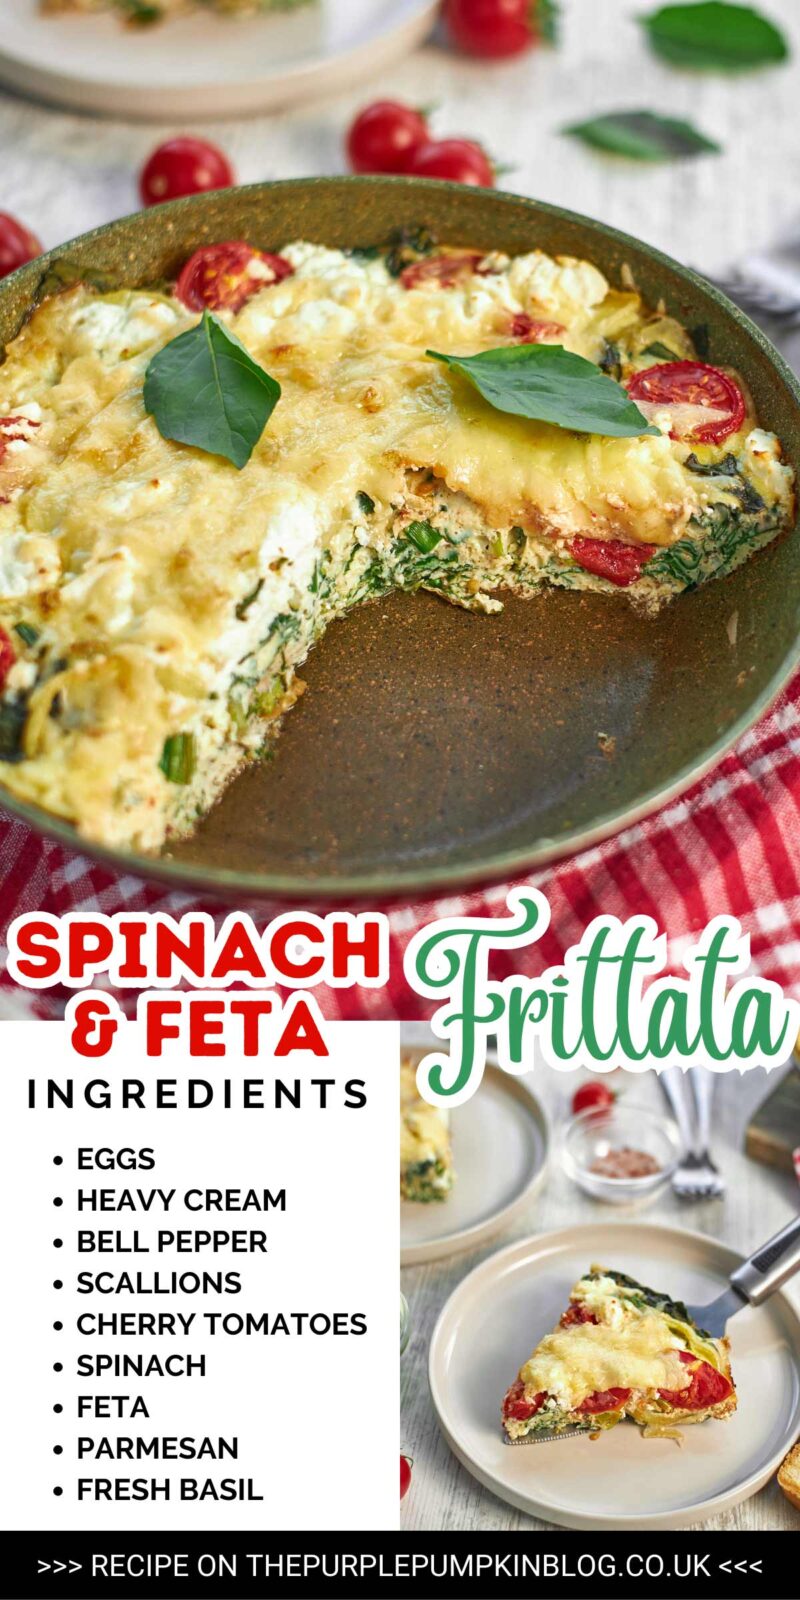 Ingredients Needed for Spinach & Feta Frittata